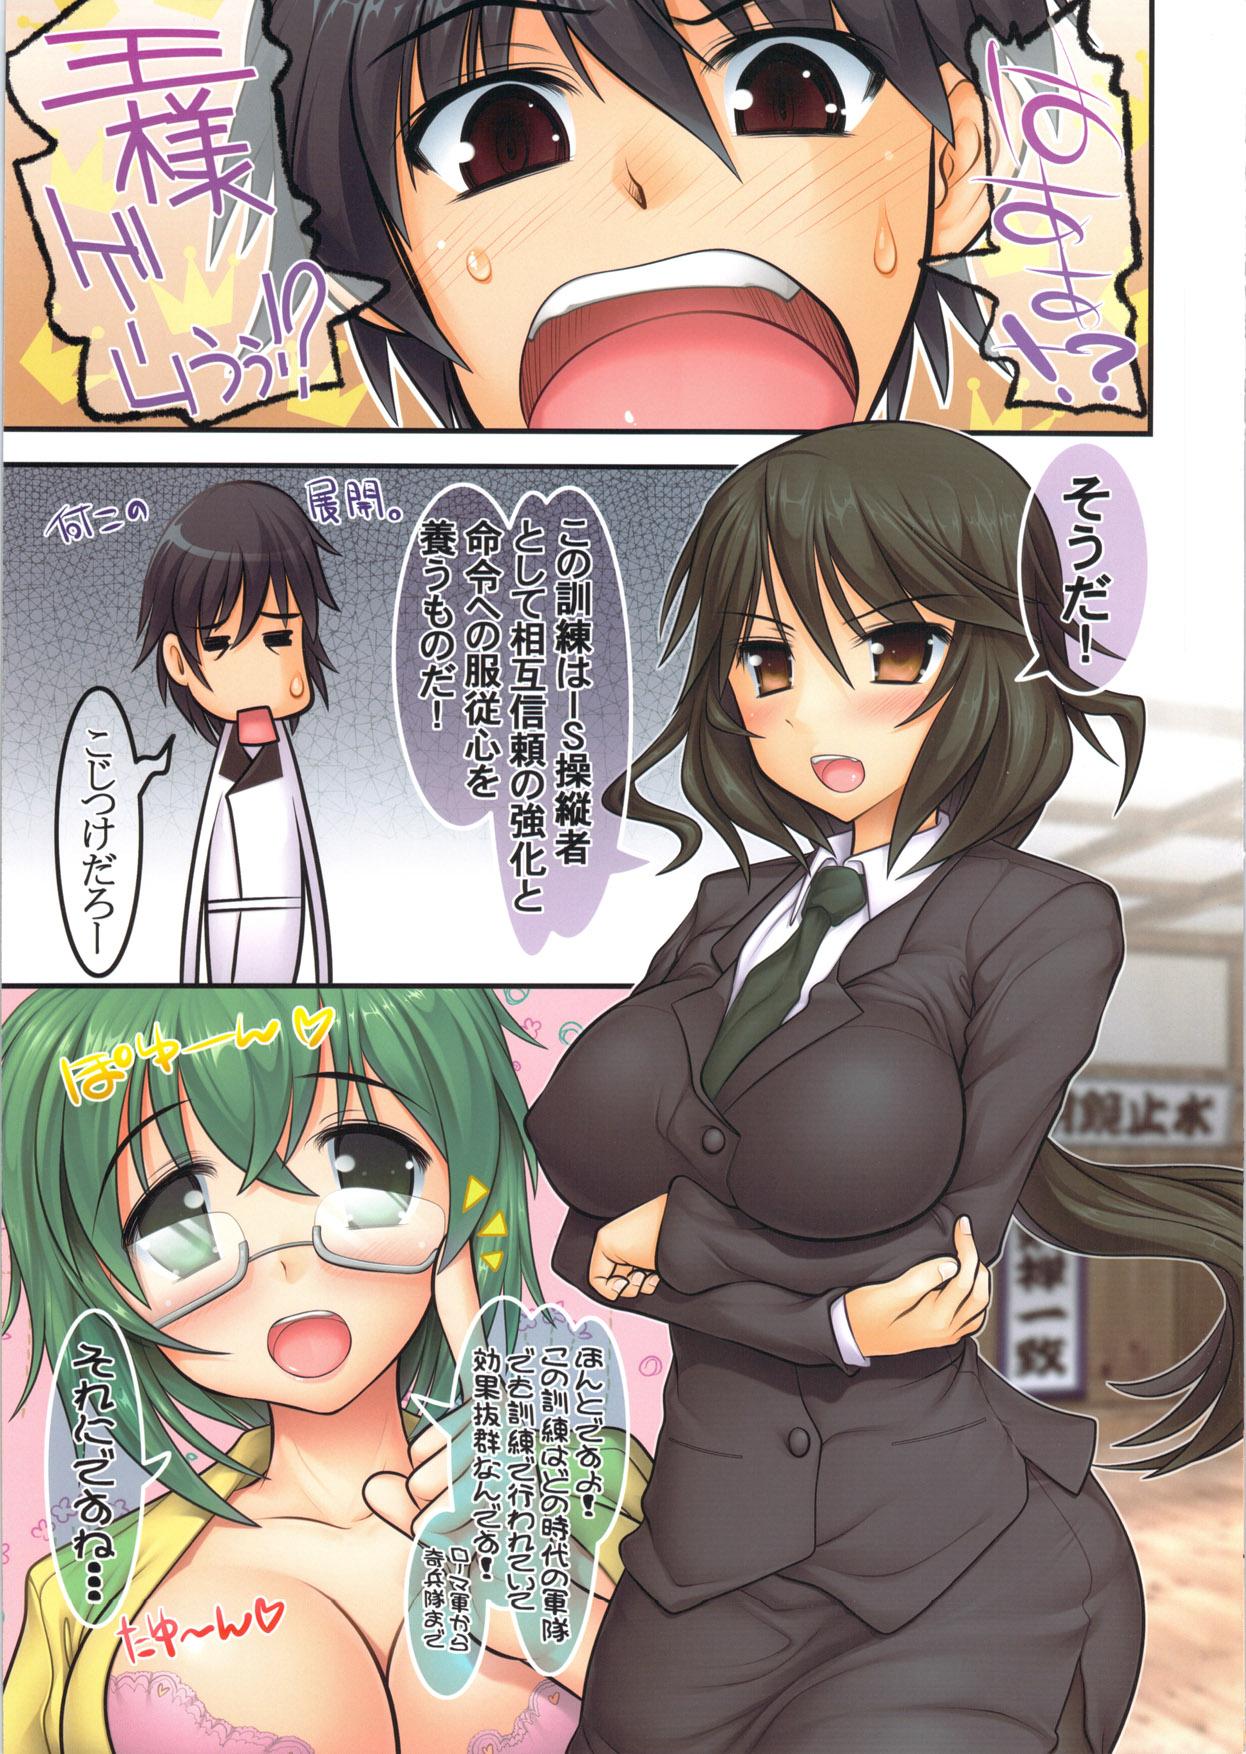 Exhibition Char to Cecilia to Sonota to Ousama Game! - Infinite stratos Guyonshemale - Page 3